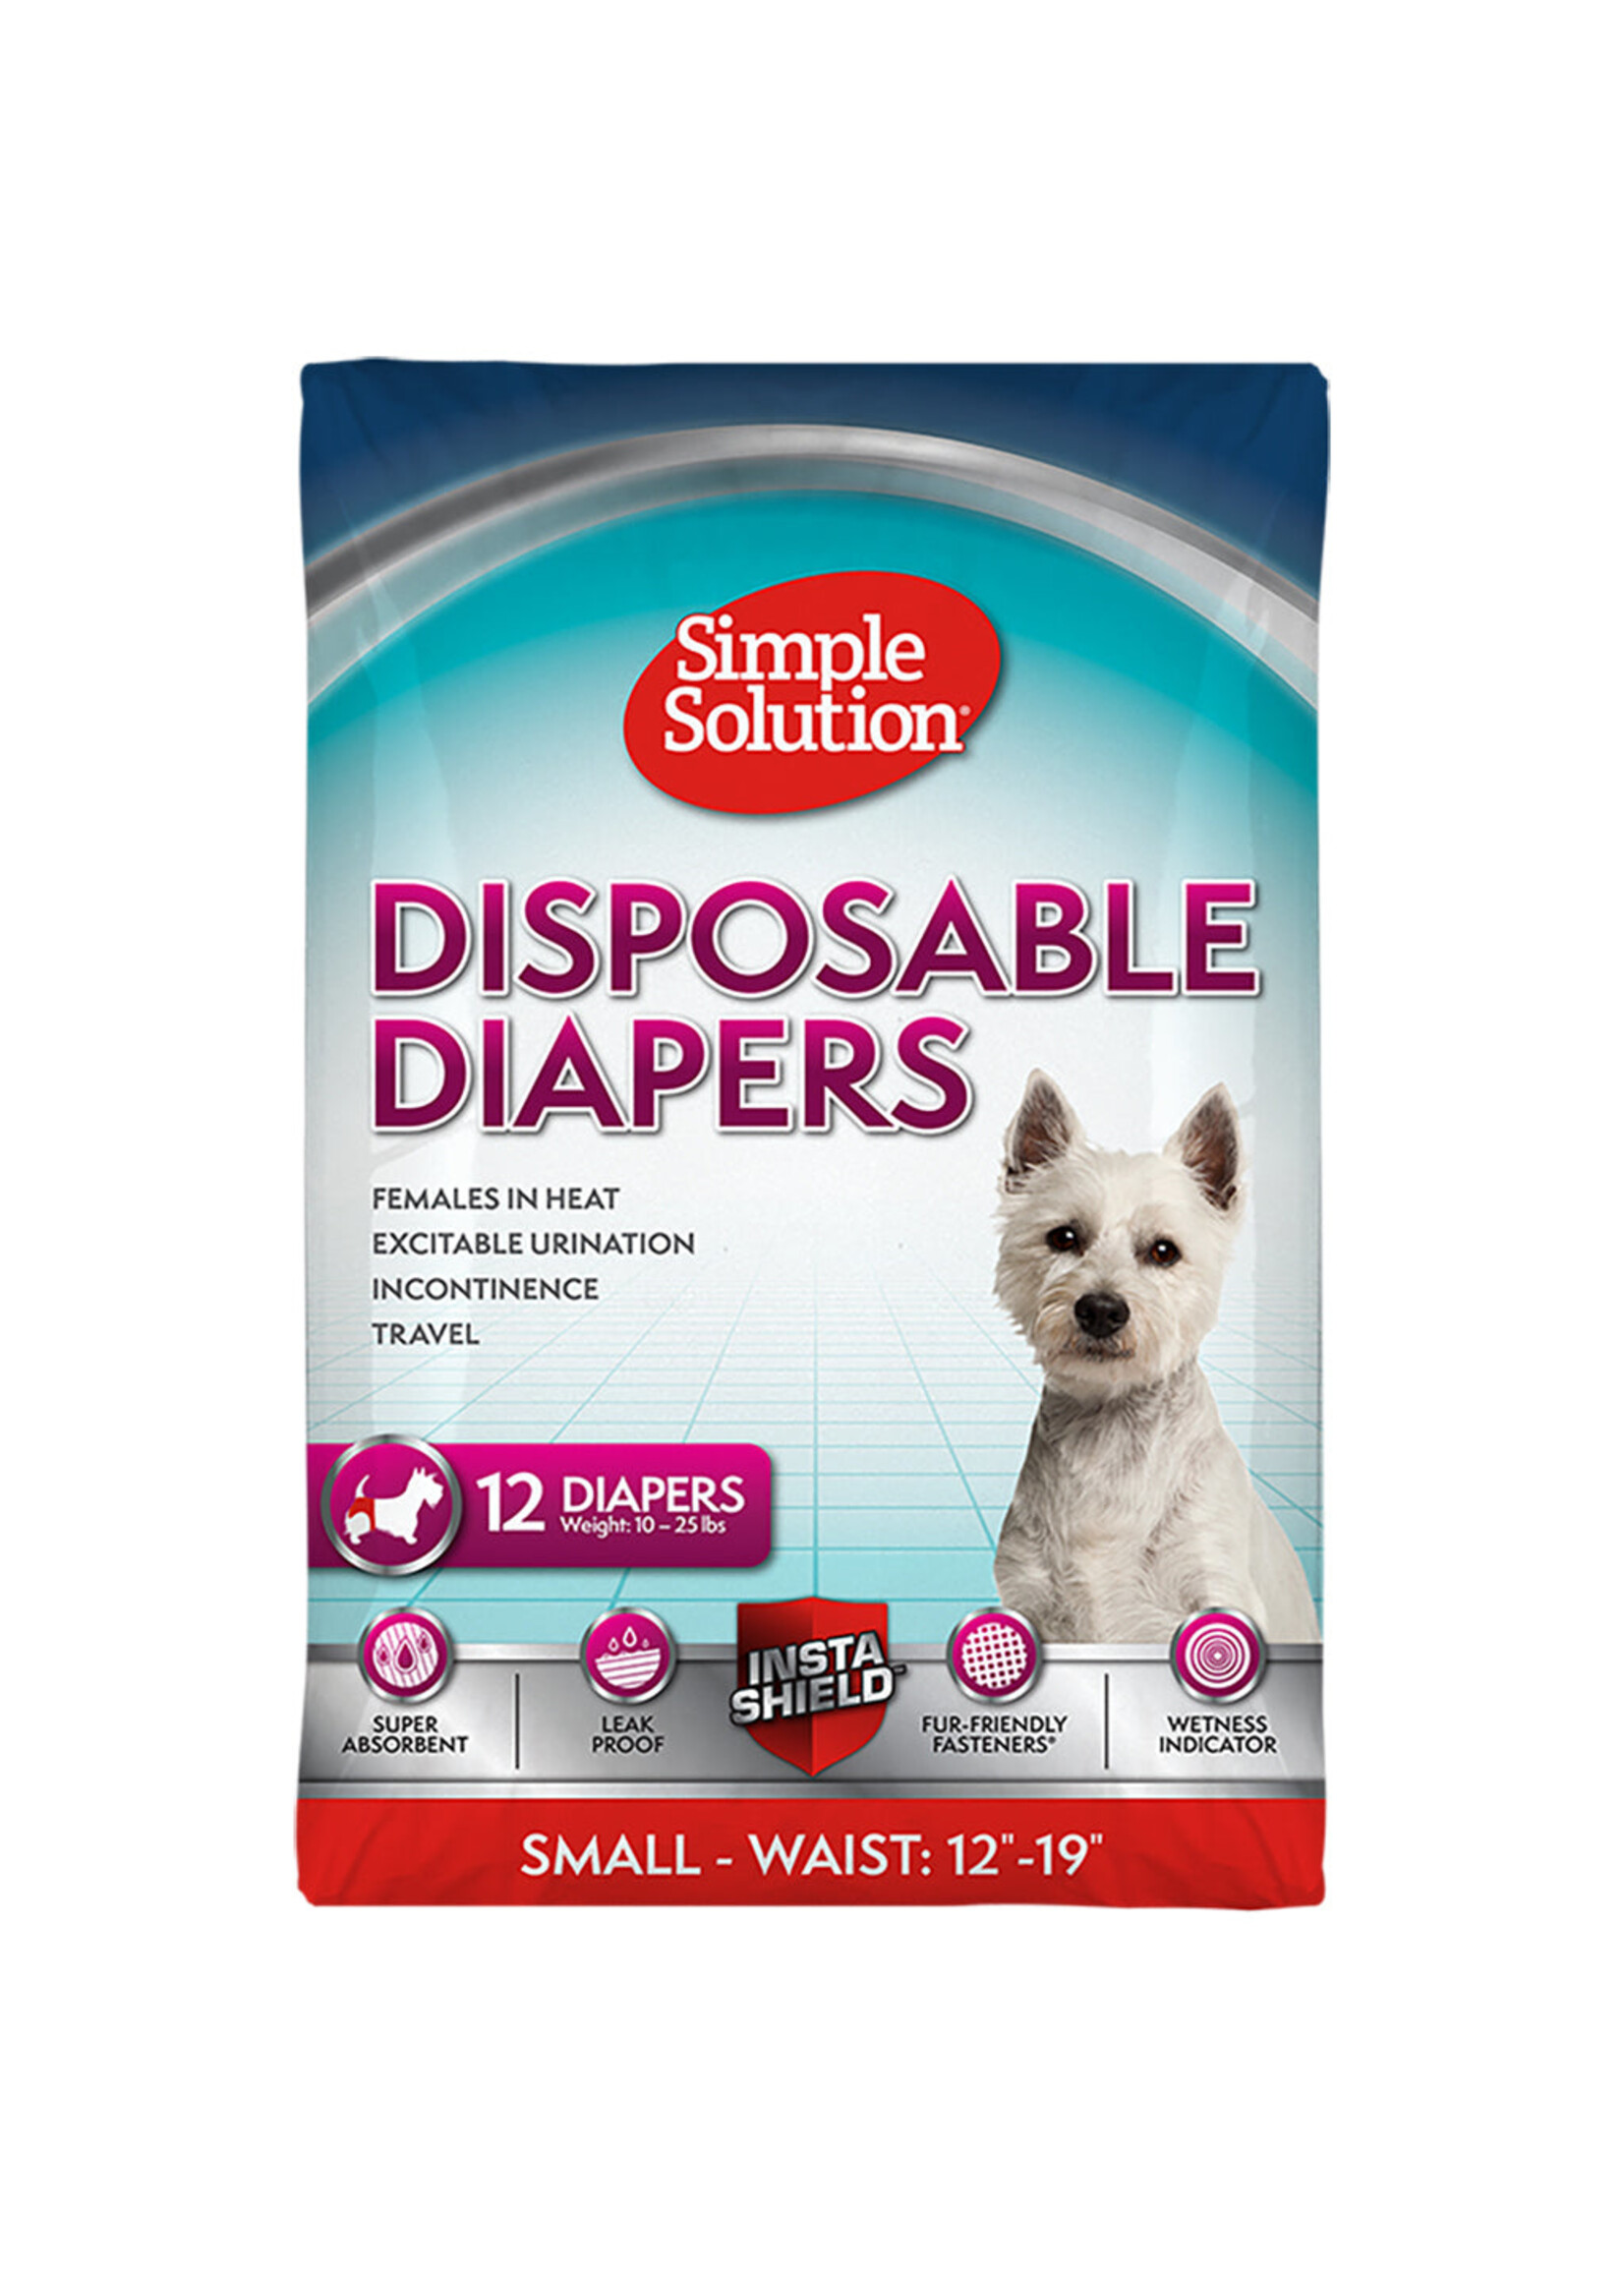 Simple Solutions Simple Solution Disposable Diapers 12pk